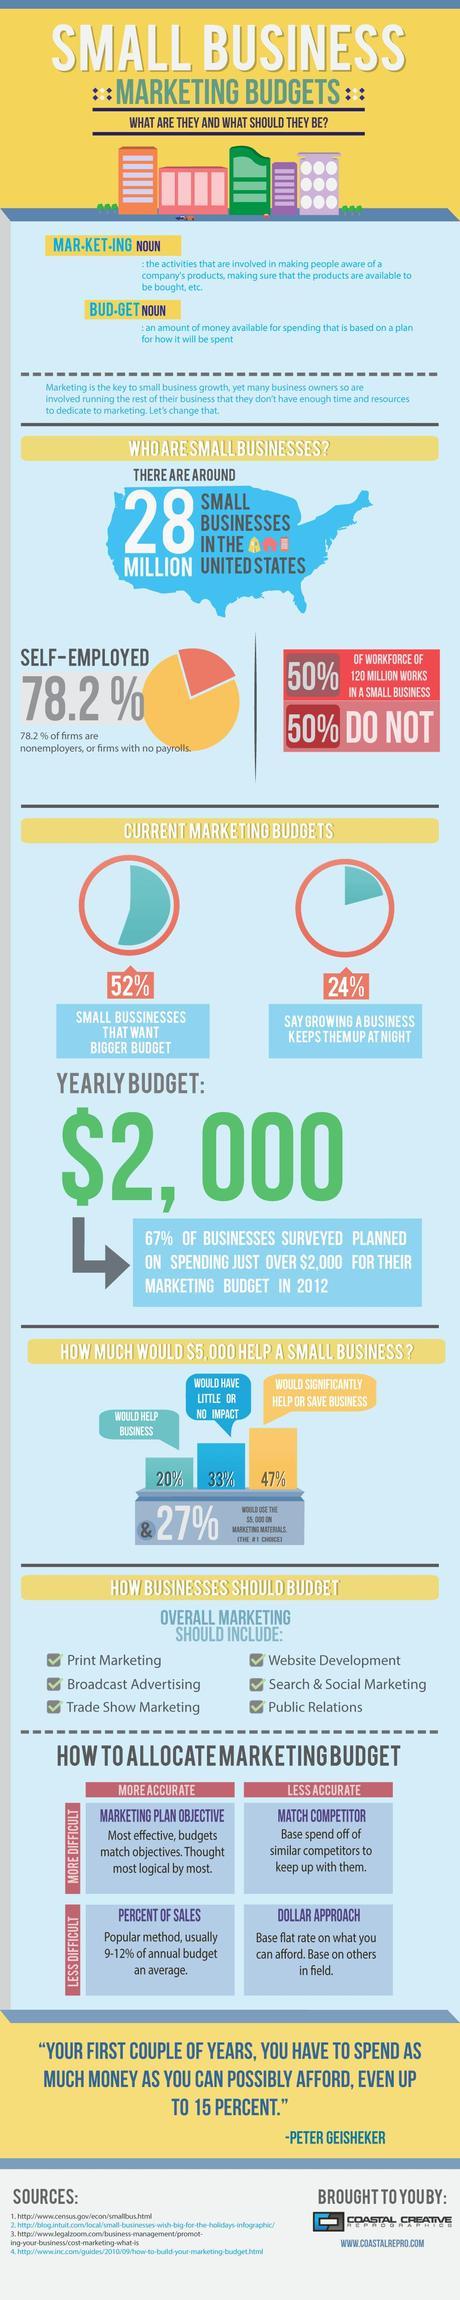 How To Determine Small Business Marketing Budgets Infographic